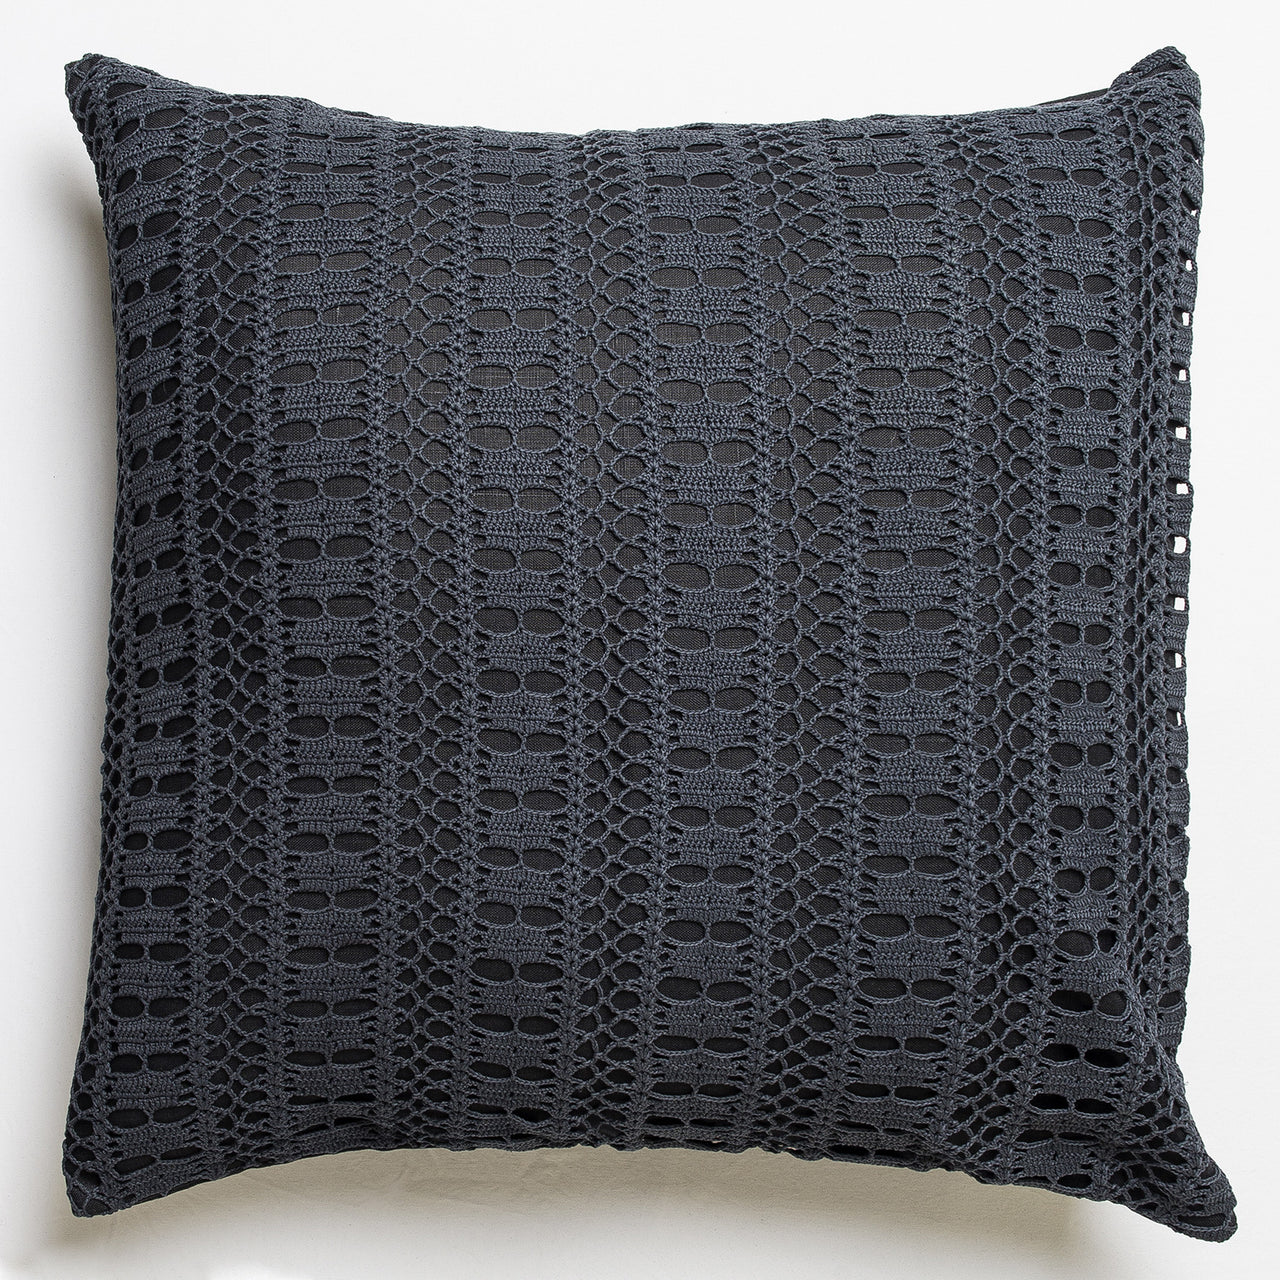 Each of these cushion is unique and a very exceptional piece, entirely handmade from vintage crochet lace collected around French regions by Veronique de Soultrait | colour:Black 1